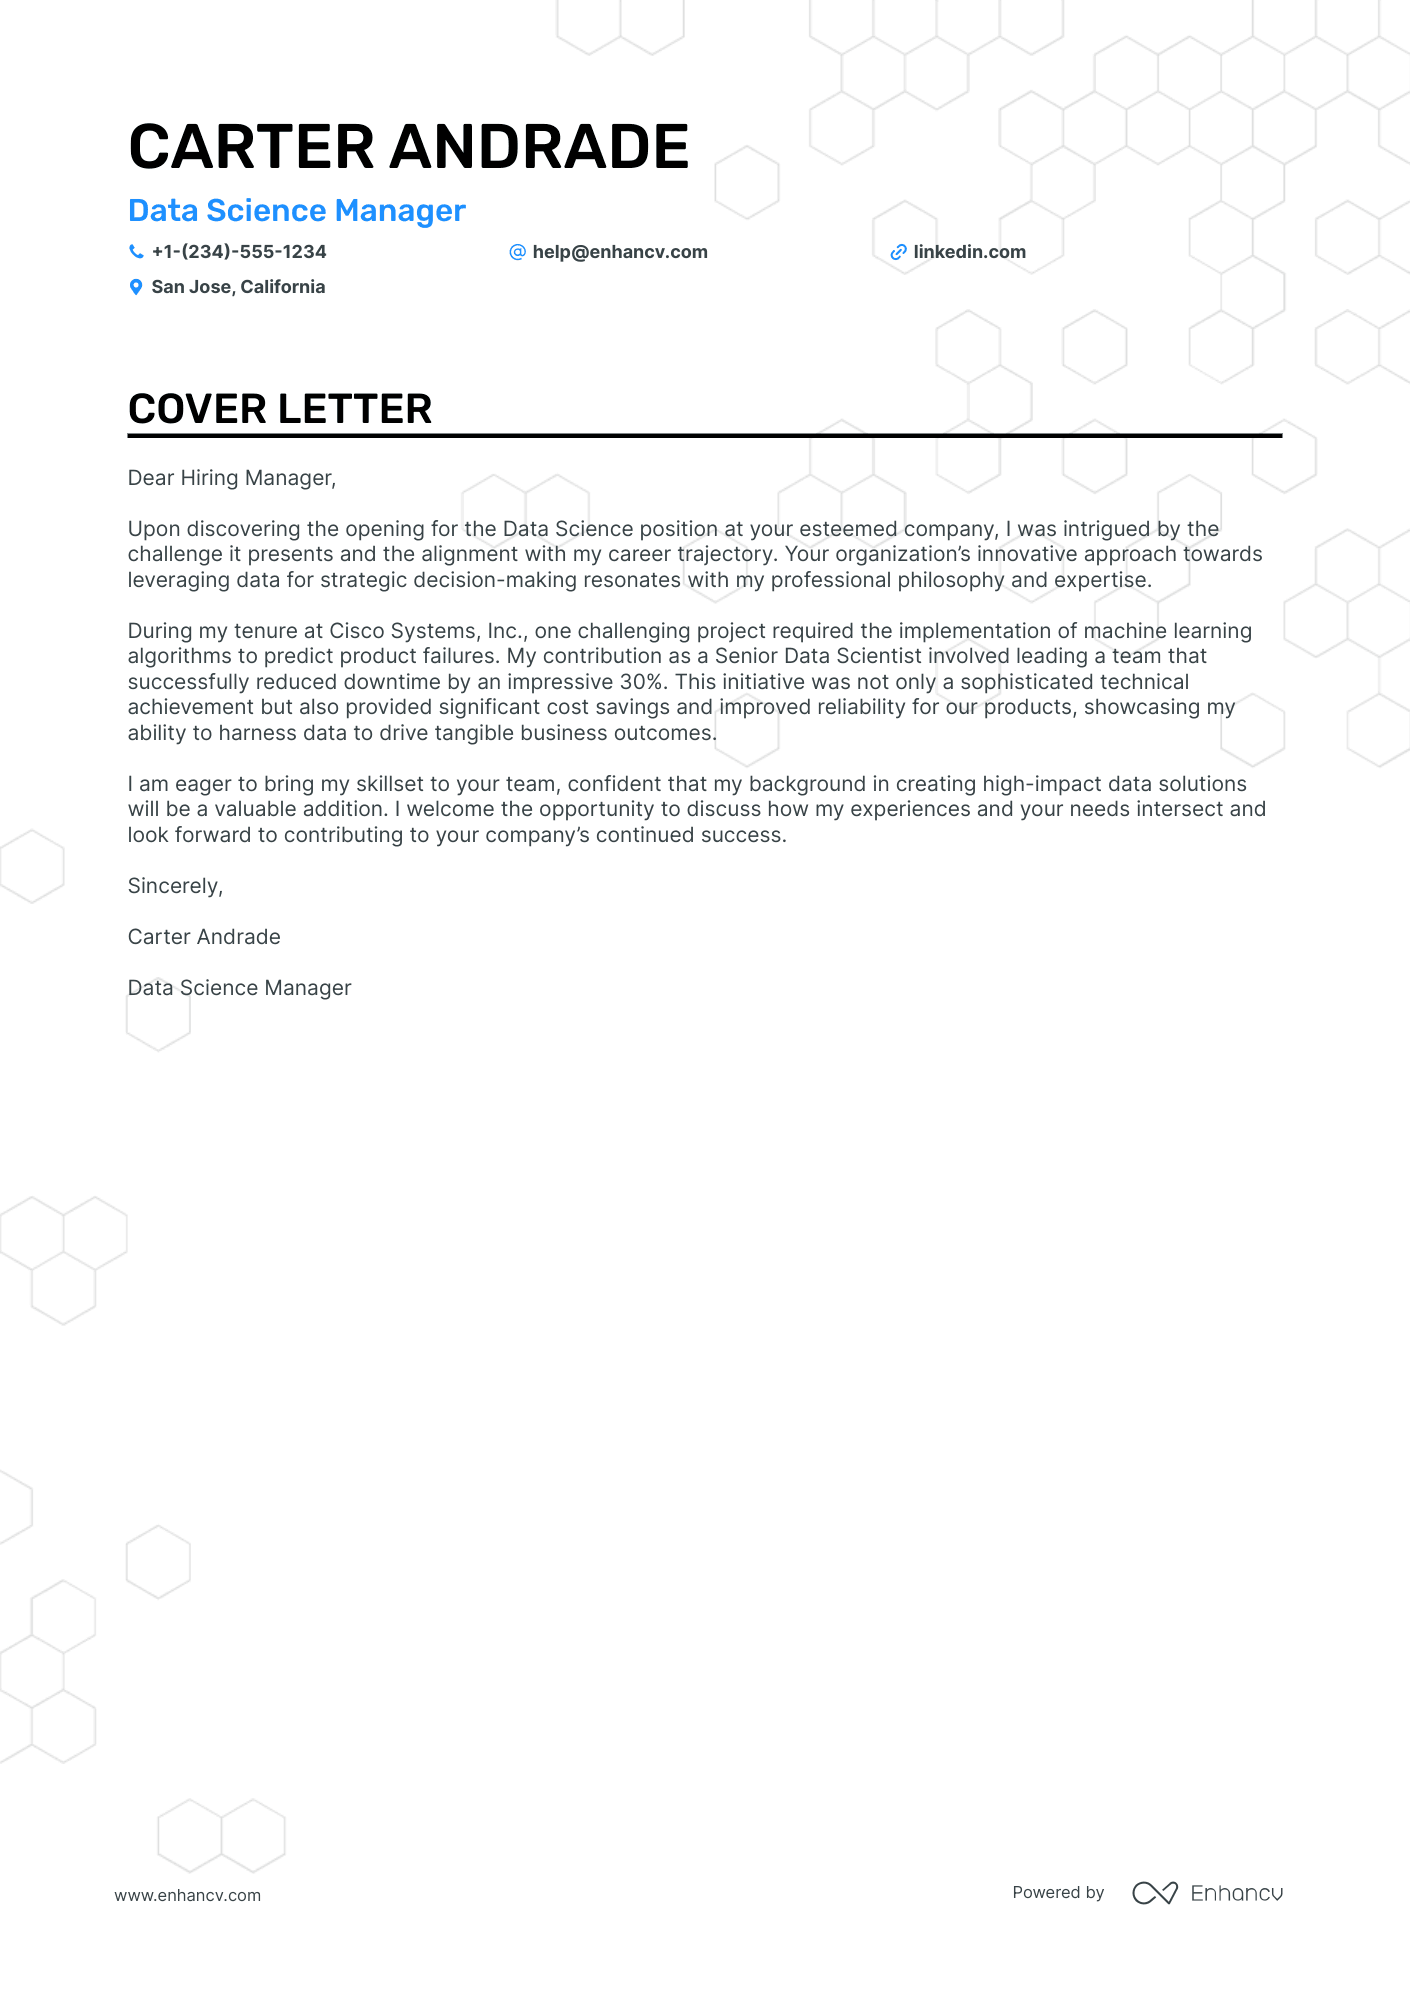 Data Science Manager cover letter